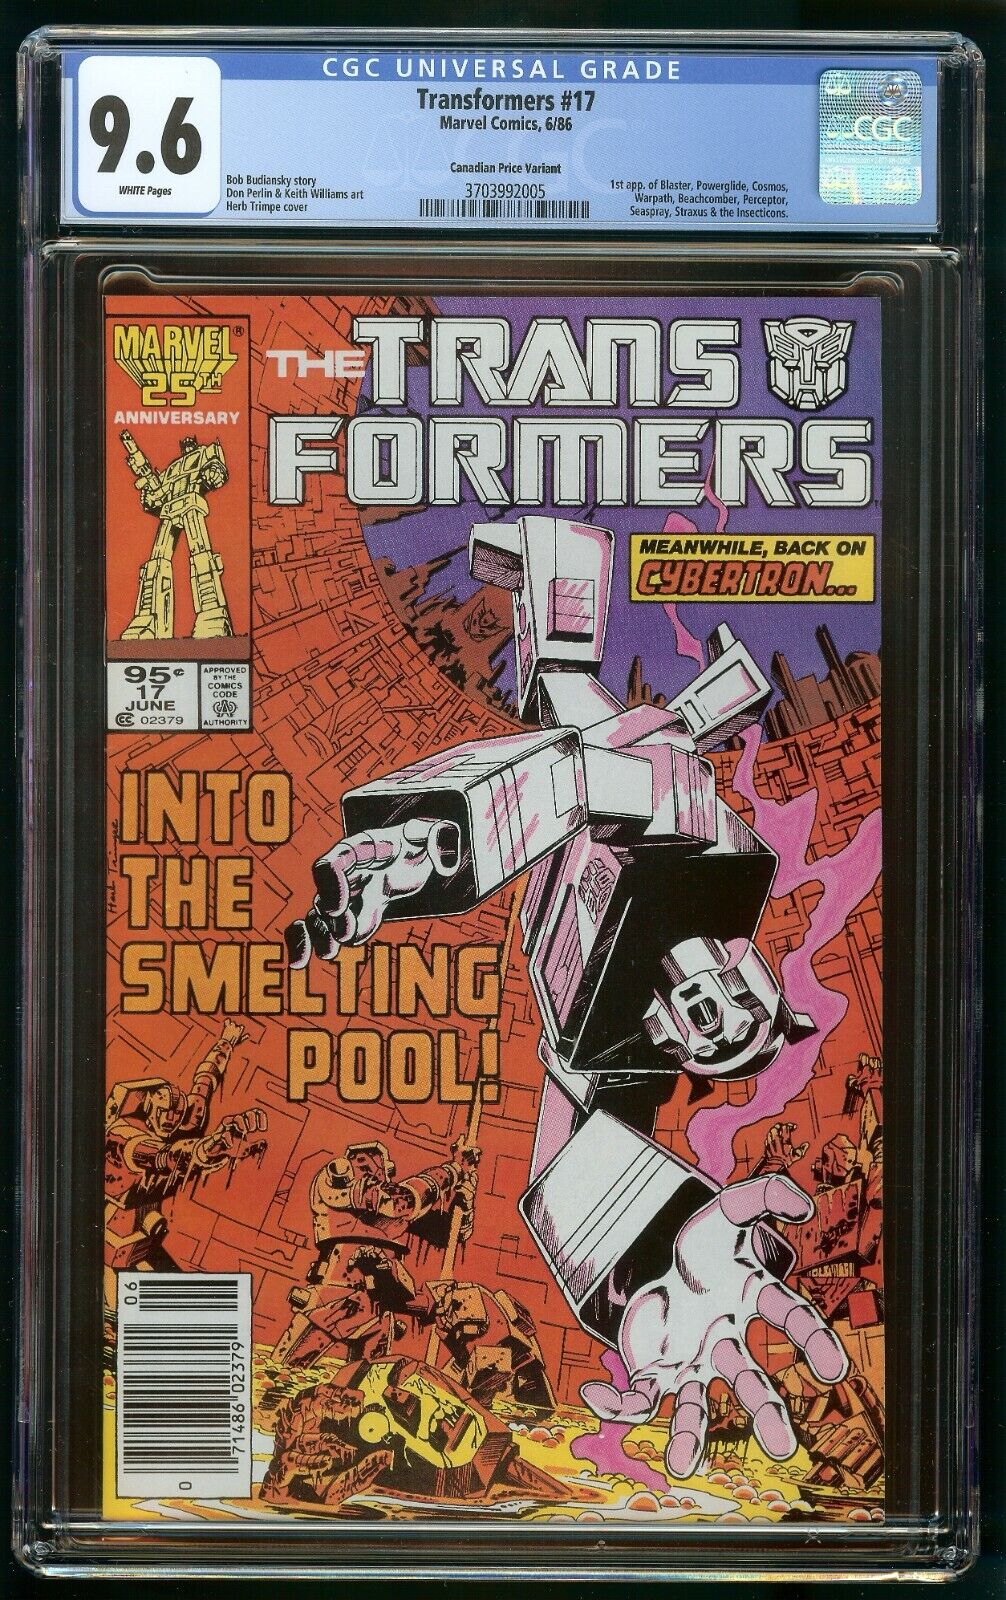 TRANSFORMERS #17 (1986) CGC 9.6 CANADIAN PRICE VARIANT CPV WHITE PAGES